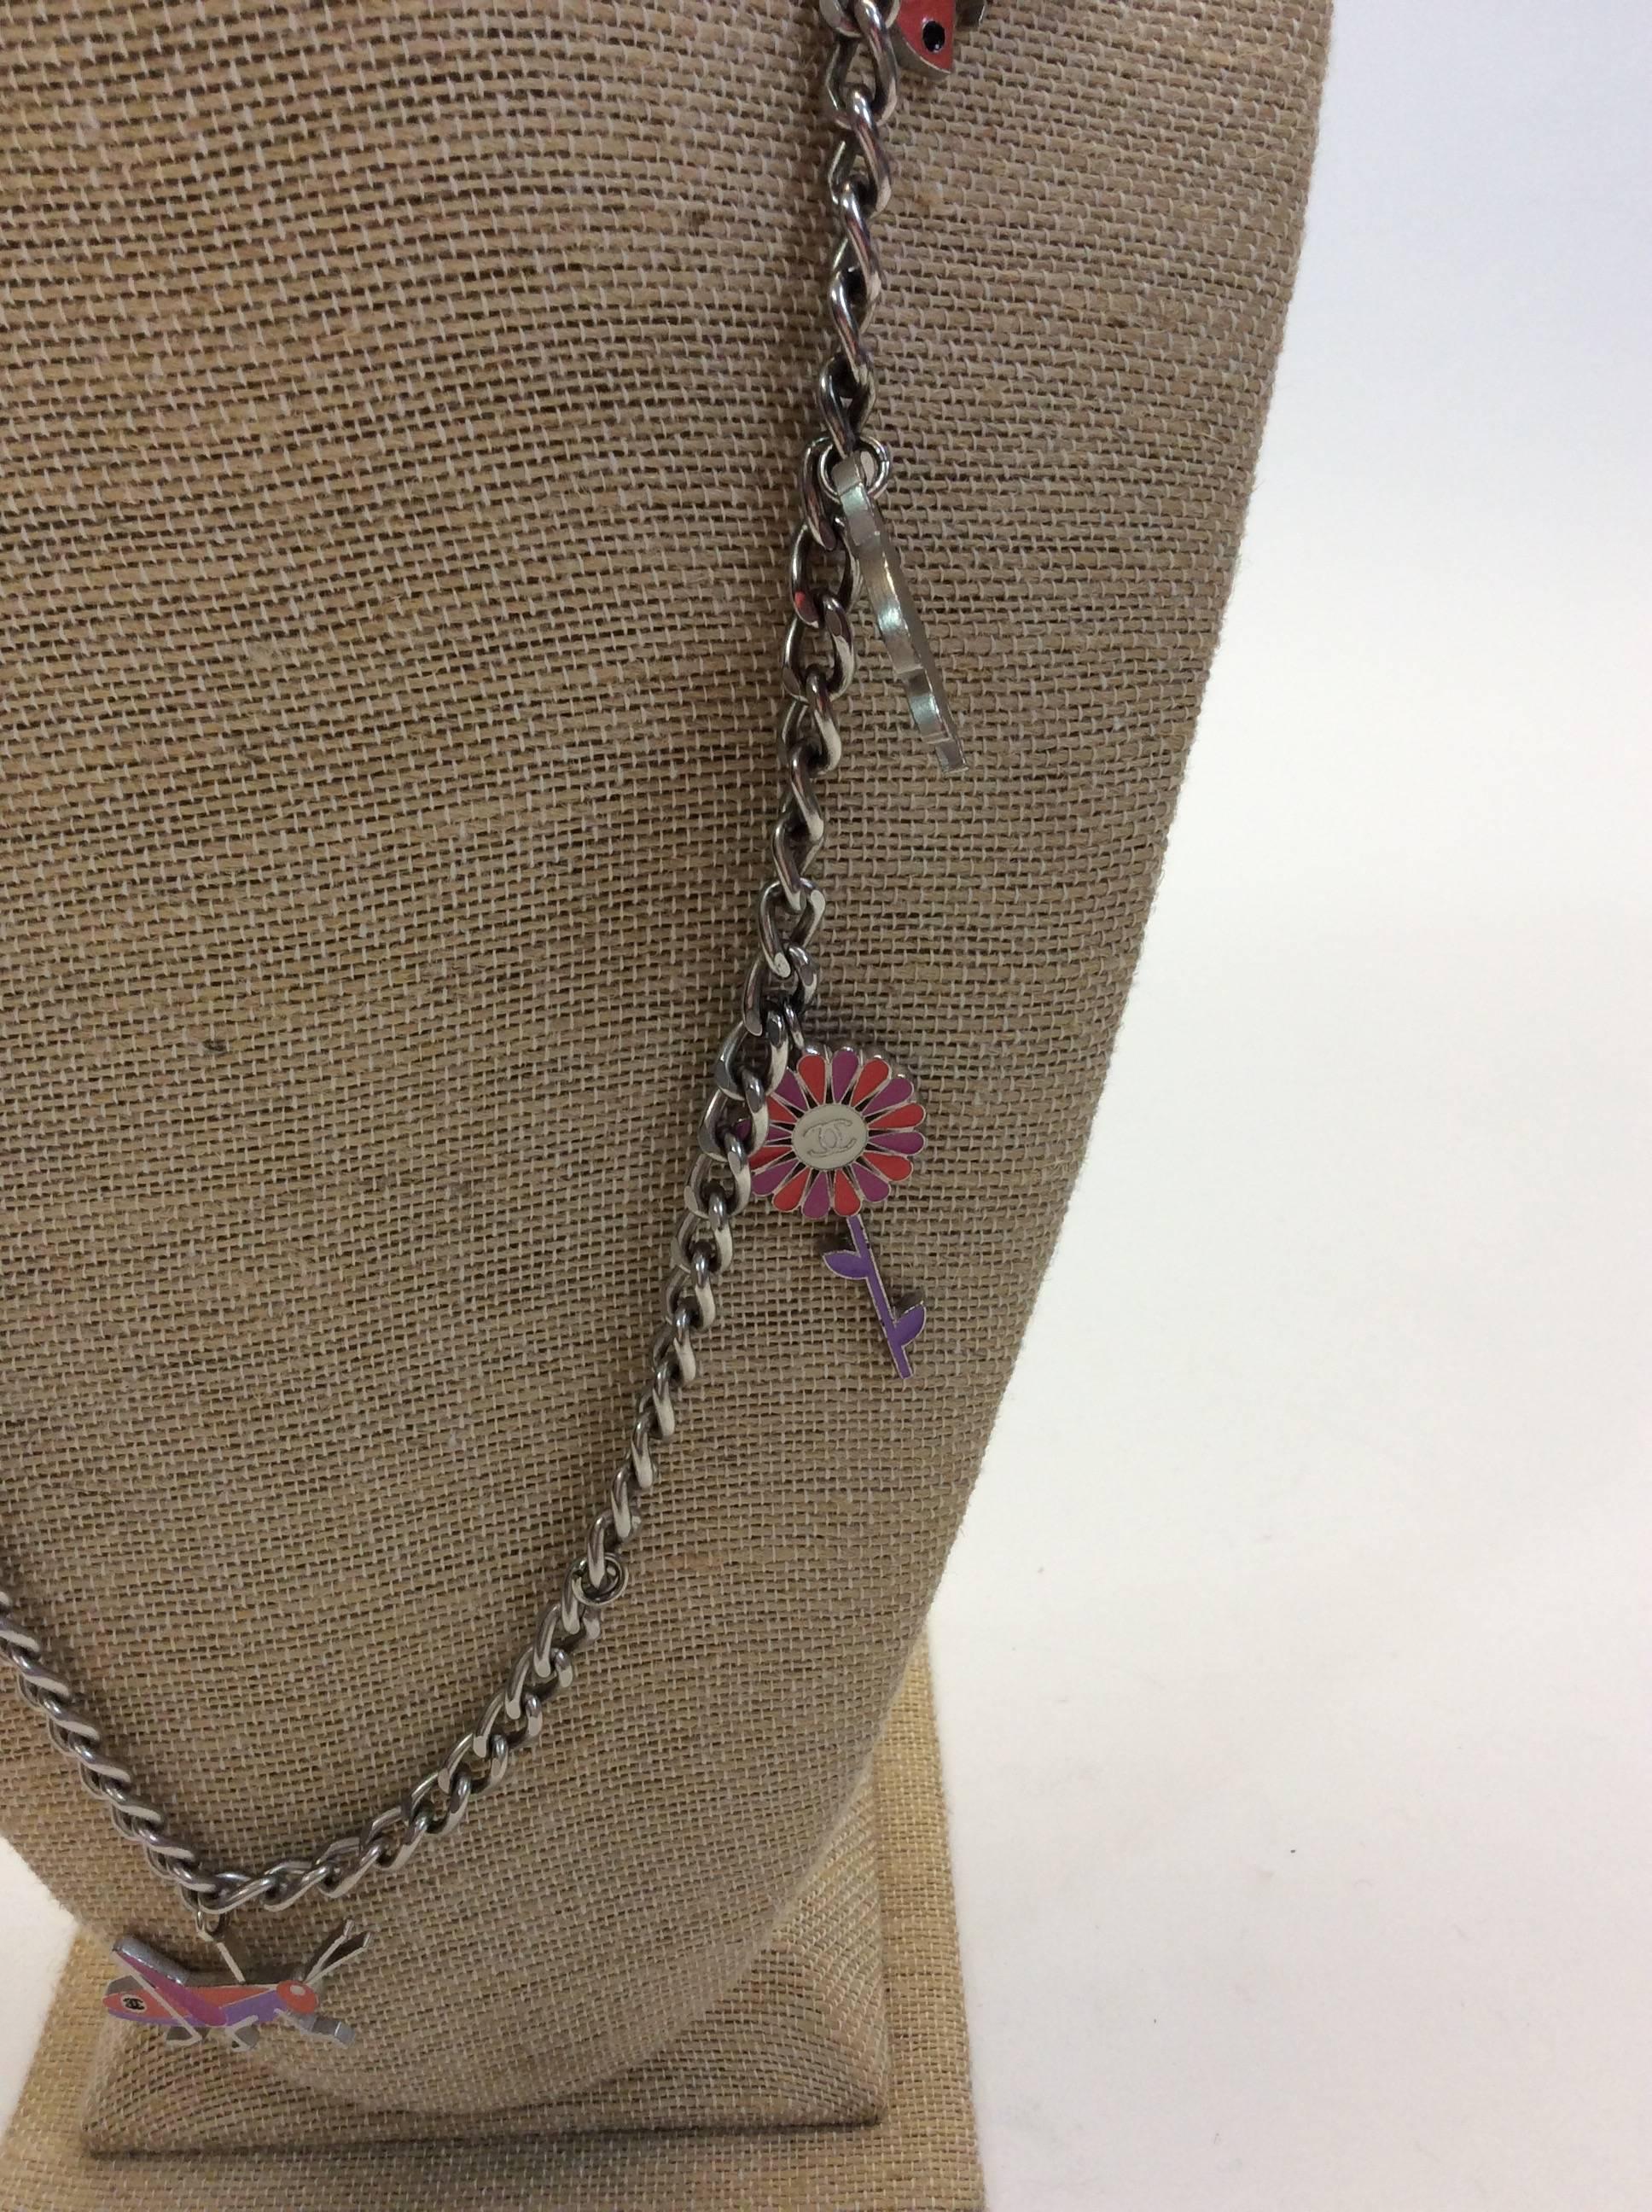 Chanel Limited Edition Charm Necklace In Excellent Condition For Sale In Narberth, PA